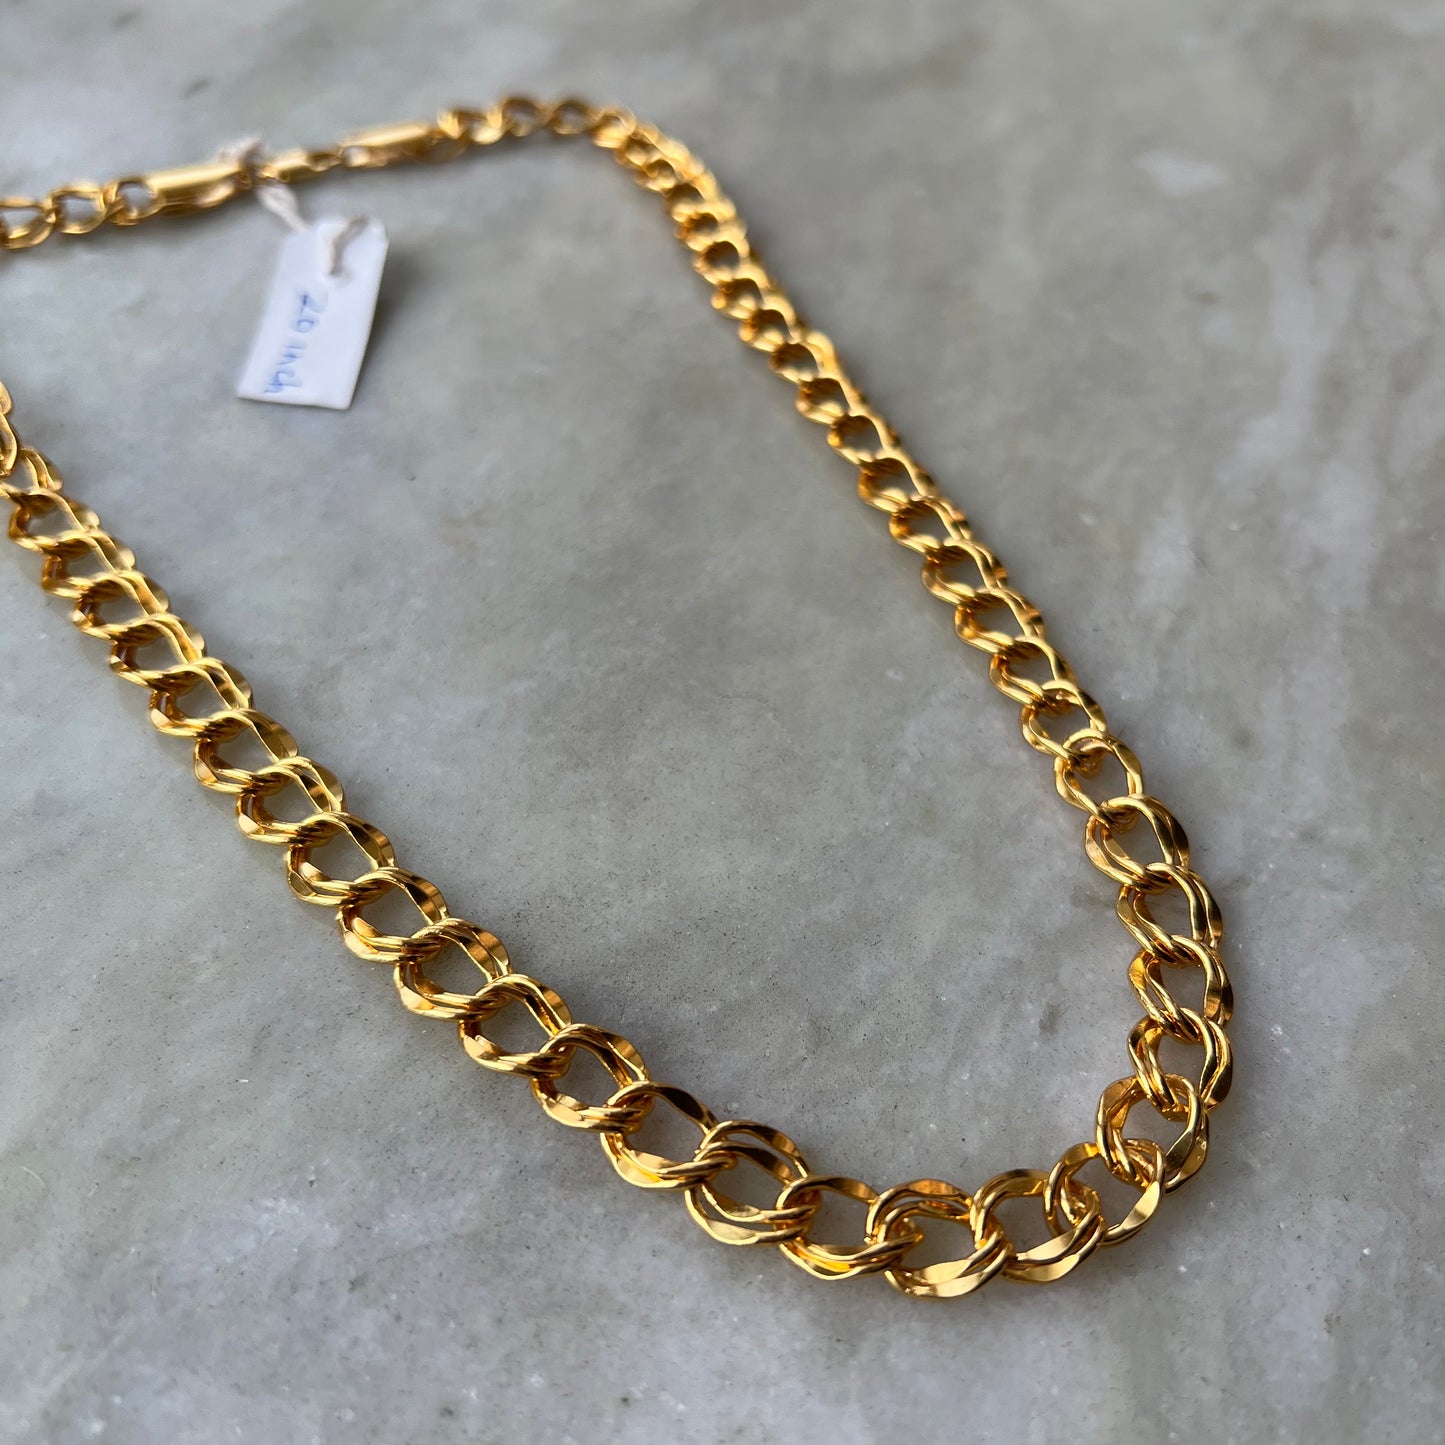 Gold Chain for Men (20 Inch Long)